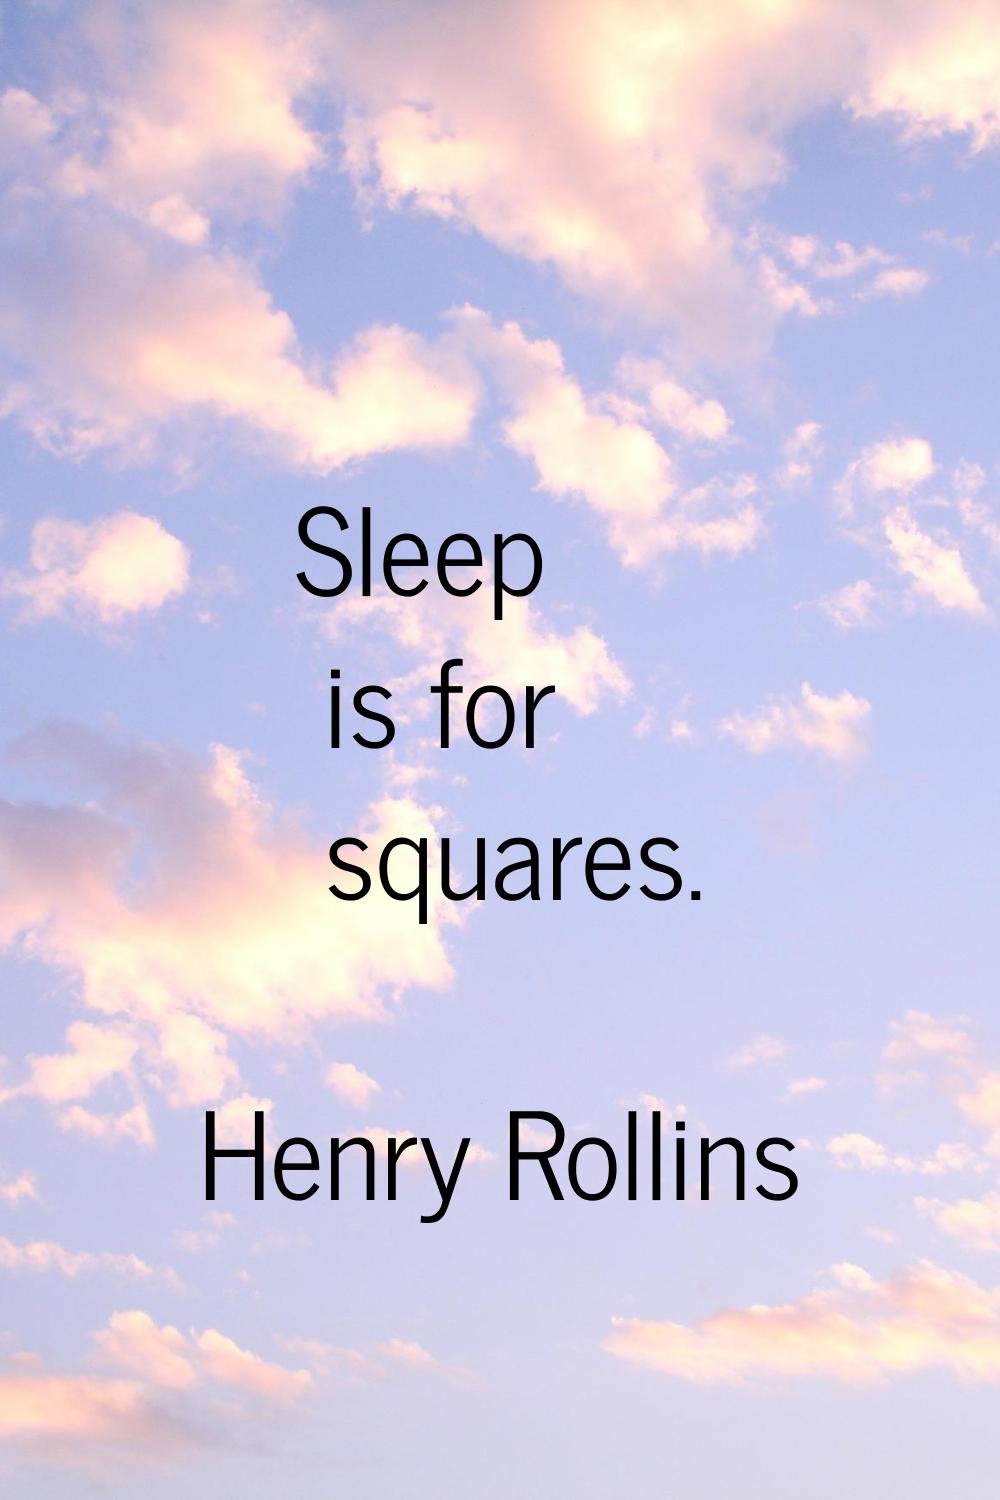 Sleep is for squares.